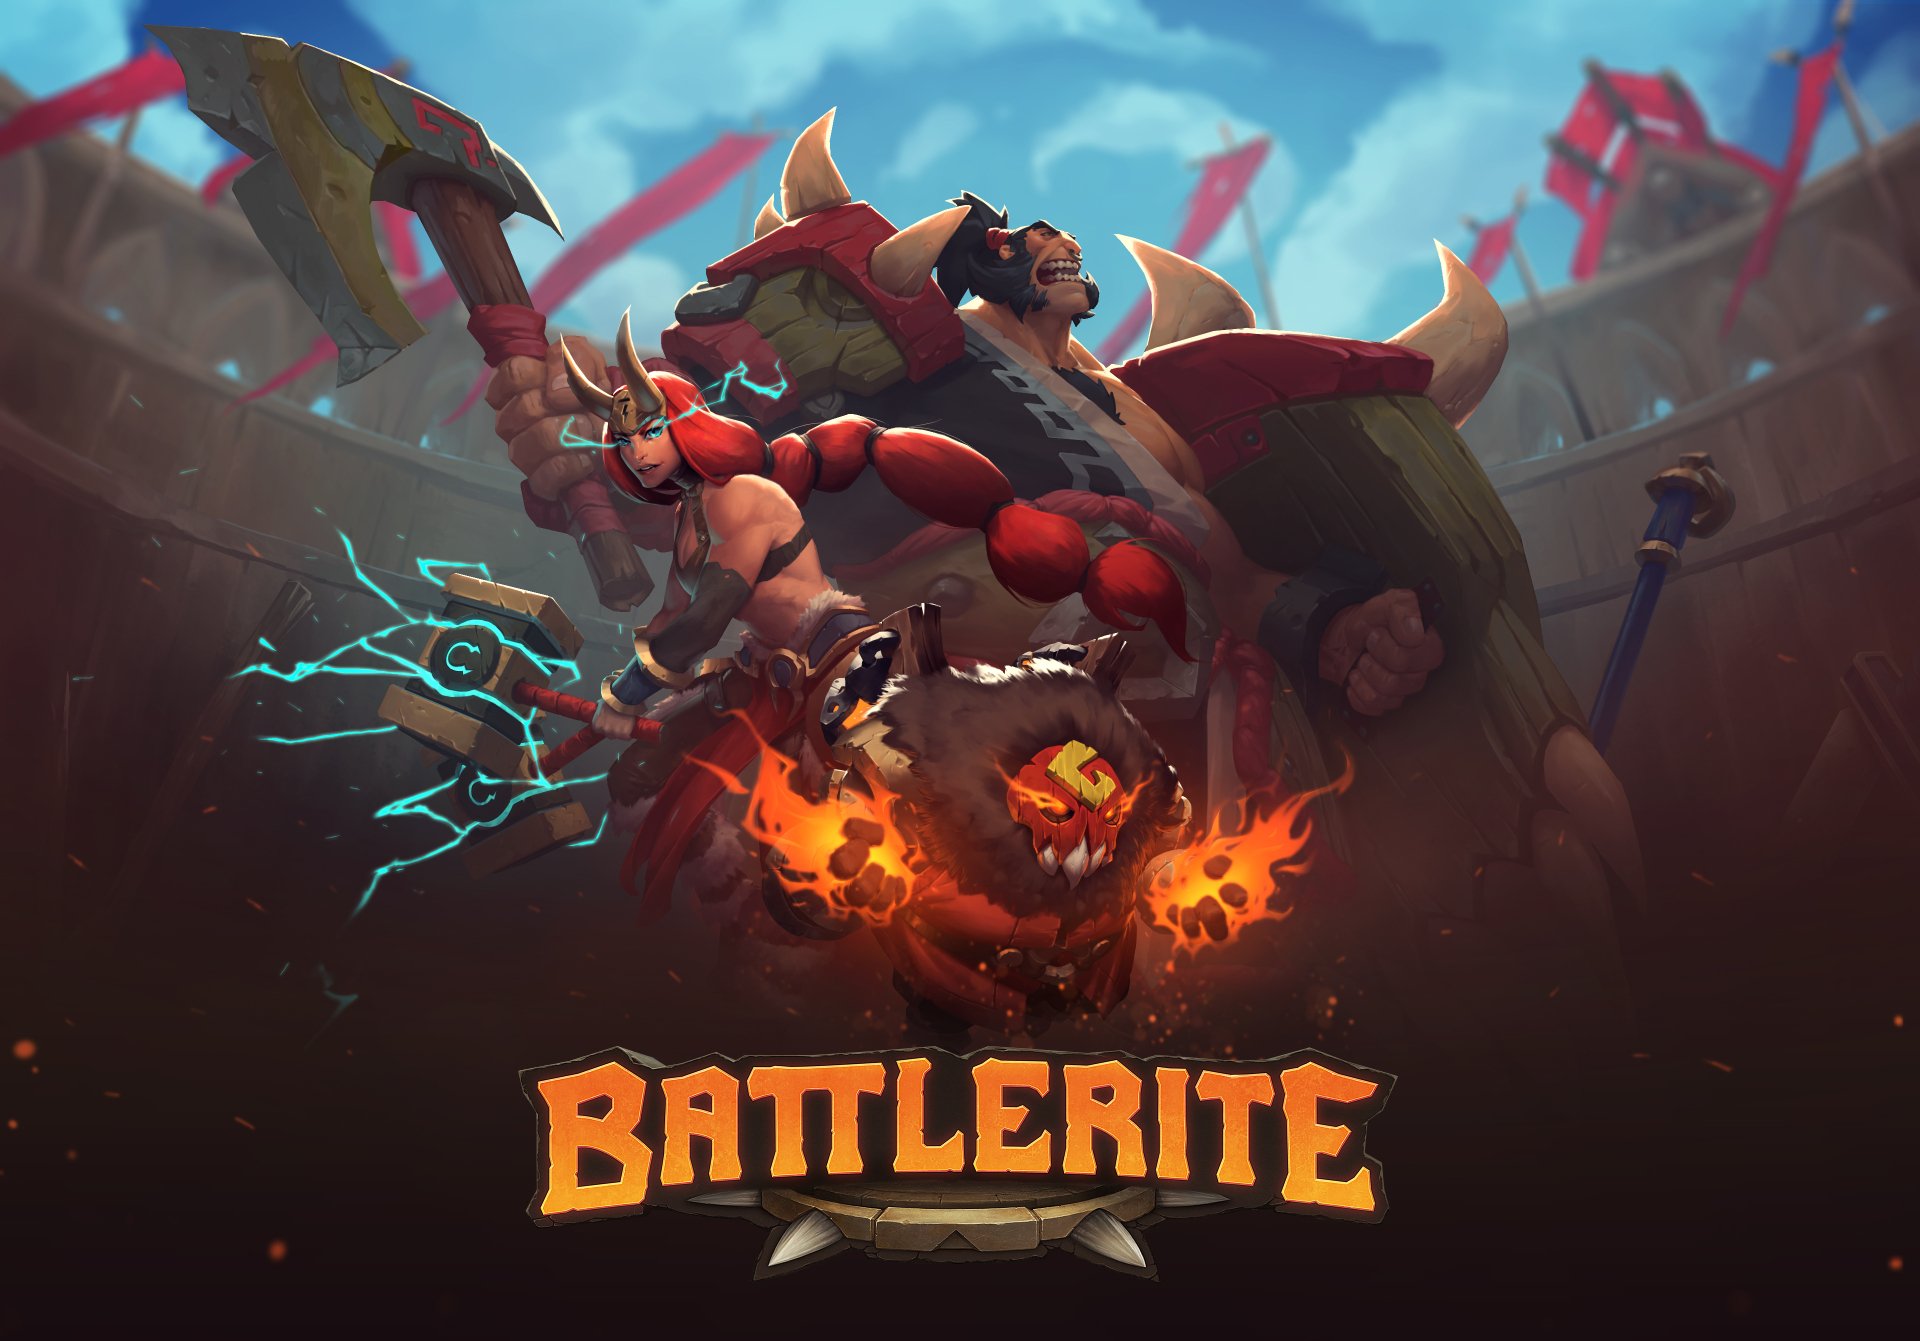 HD desktop wallpaper featuring dynamic characters from the game Battlerite in a stylized arena backdrop.